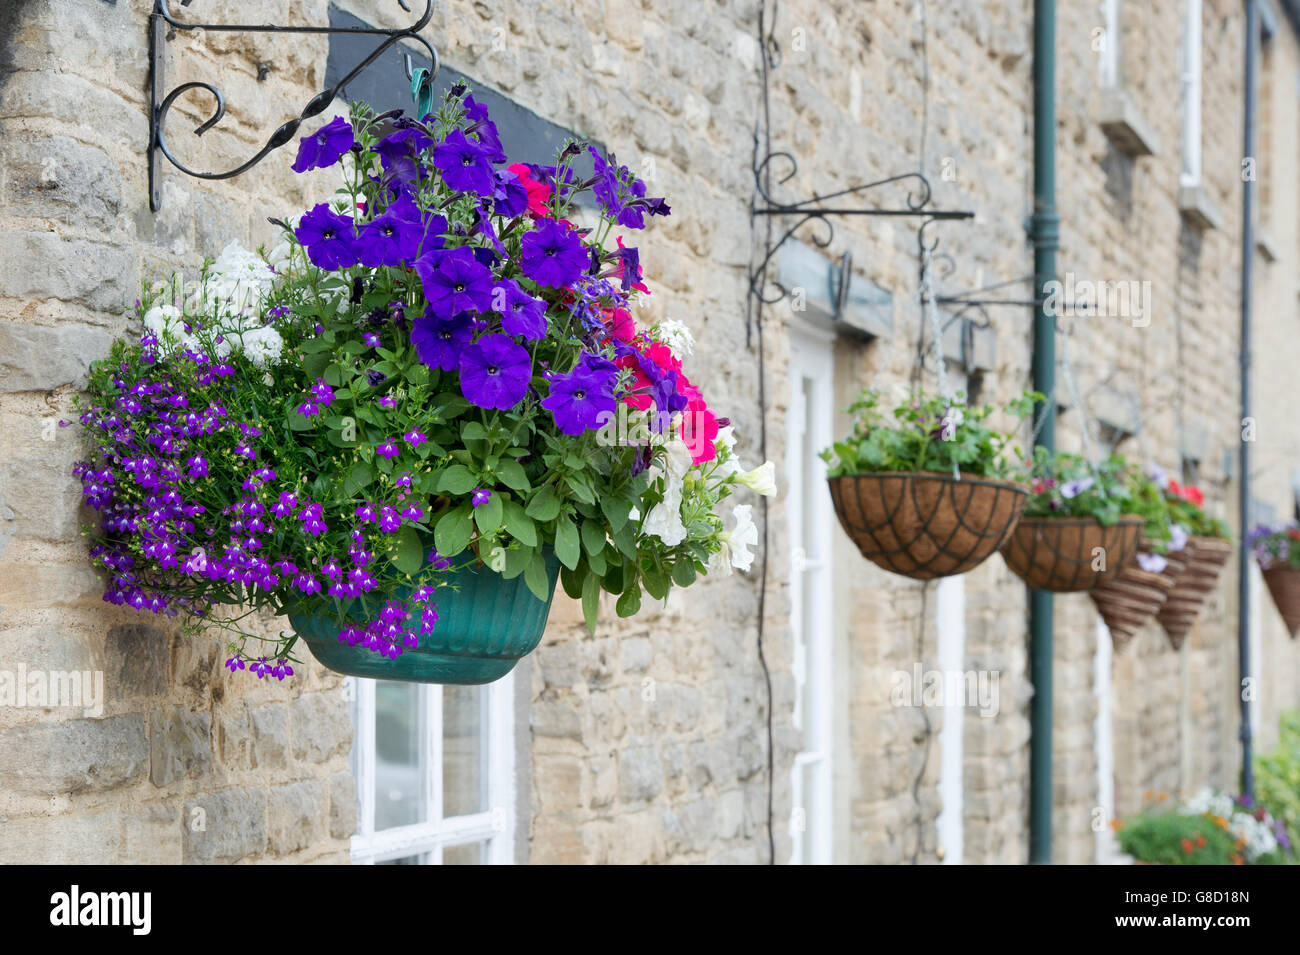 Hanging baskets in front of stone buildings. Bampton, Oxfordshire, England Stock Photo